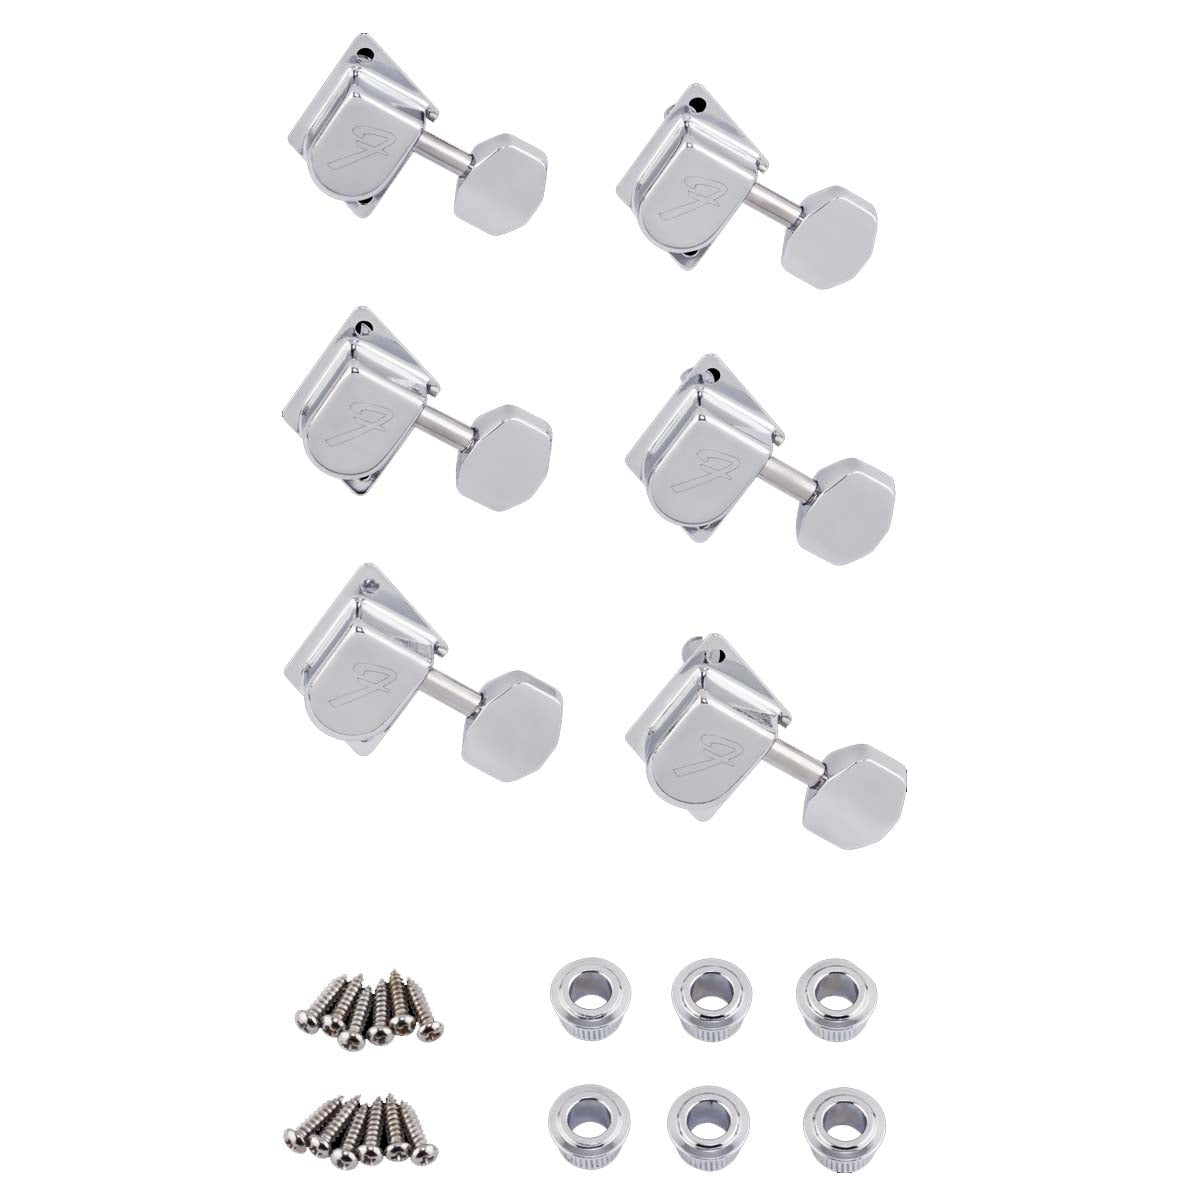 Fender 70s "F" Style Stratocaster/Telecaster Tuning Machines Chrome (6 Pack) - 0990822100